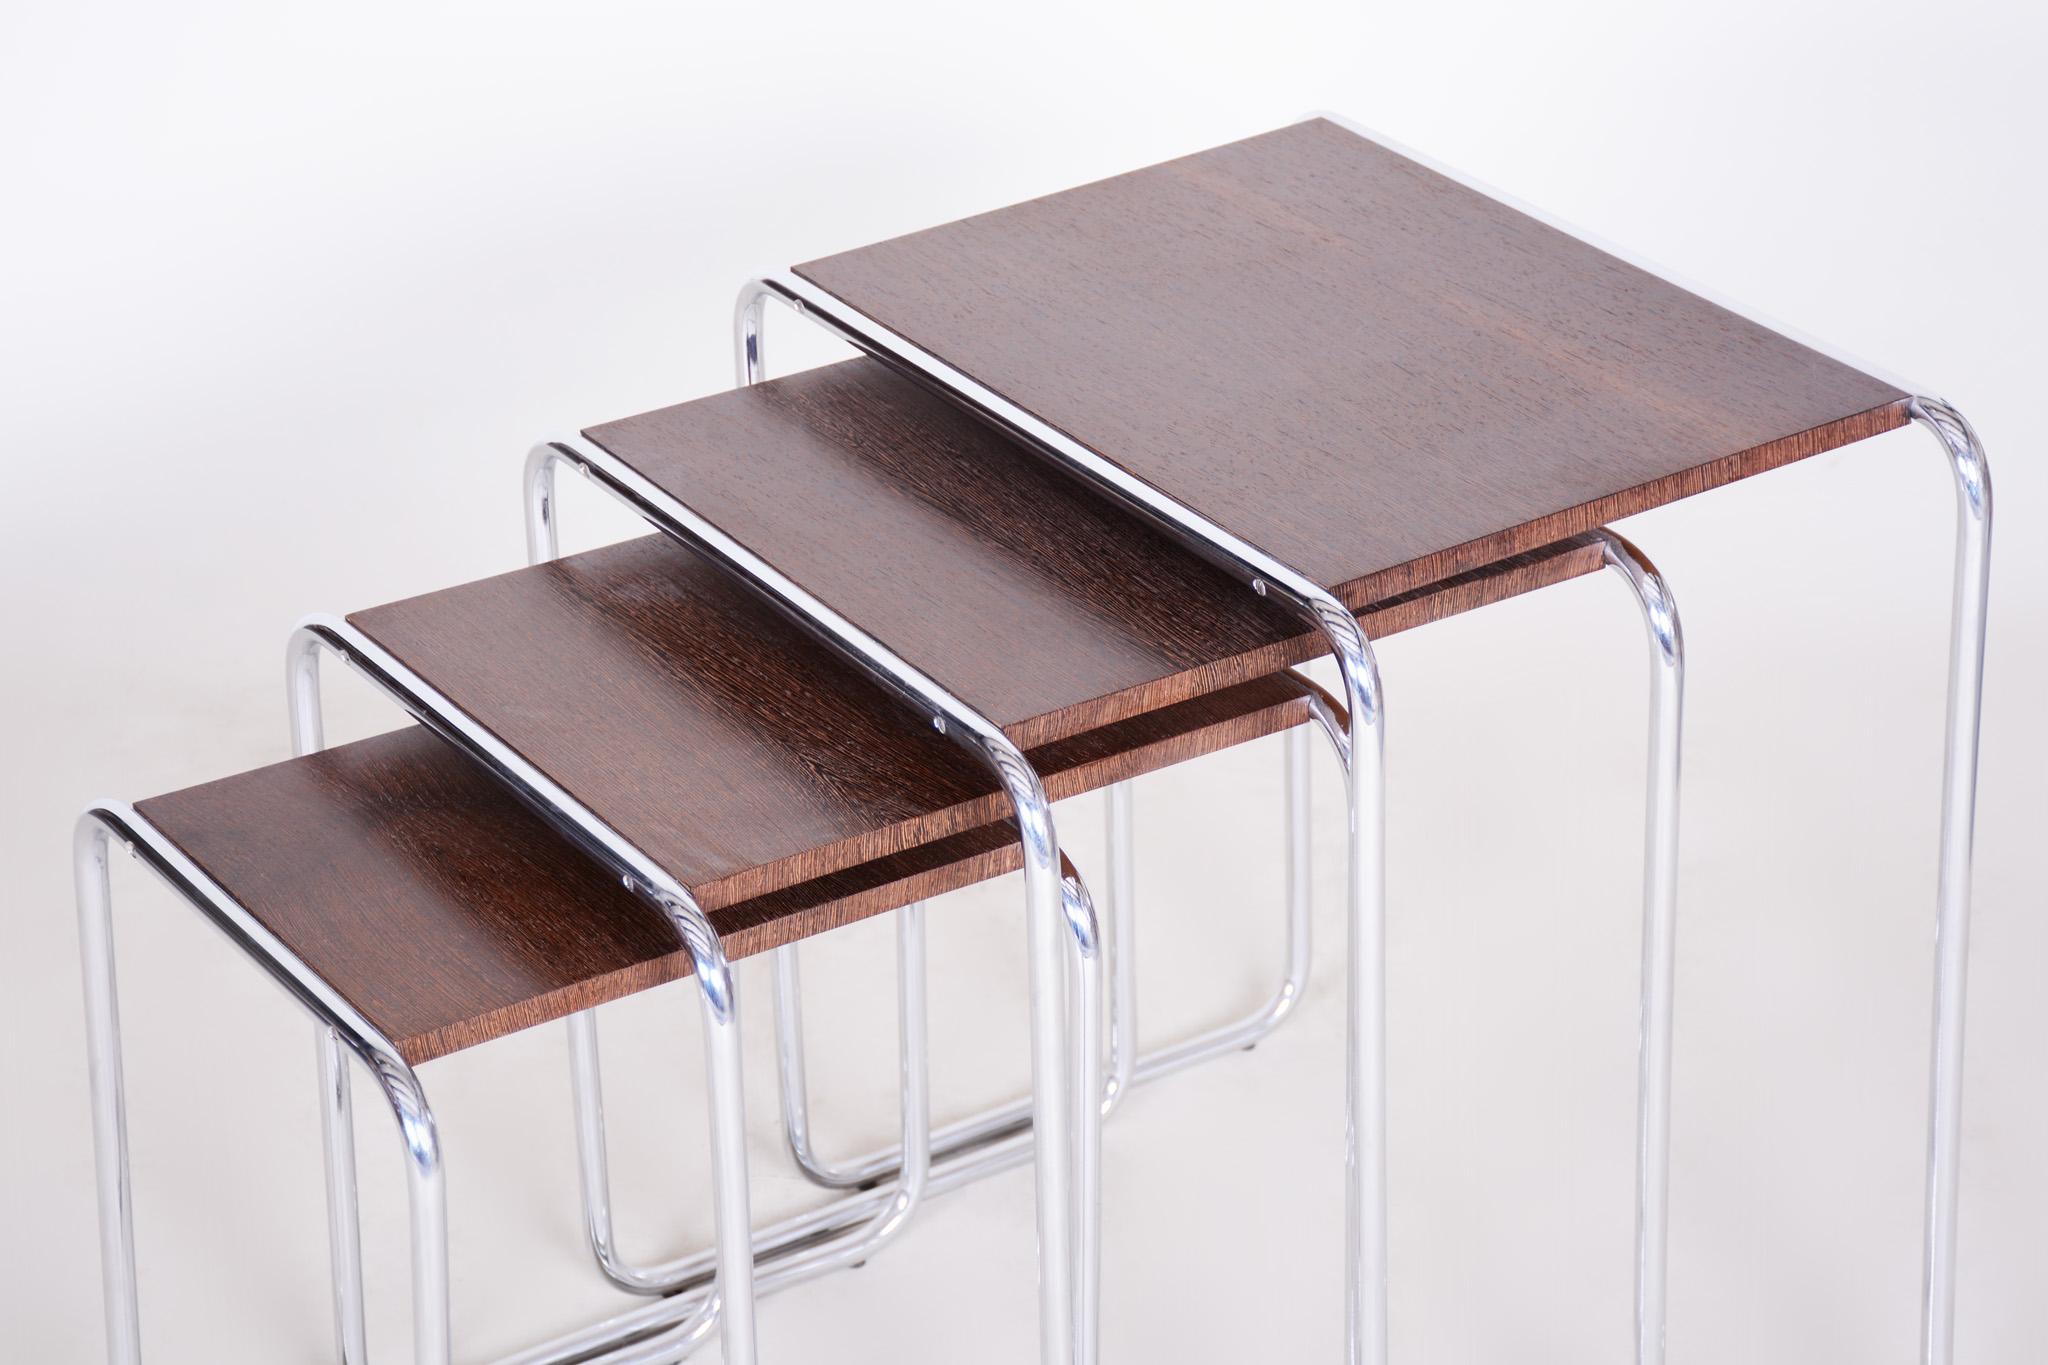 Beautiful Brown Nest tables made in the 1950s, they are made out of lacquered wood and chrome plated steel. 
Made by Kovona

Dimensions of the biggest piece: 
Height: 59 cm (23.23 in)
Width: 56,5 cm (22.24 in)
Depth: 37 cm (14.57 in).
 